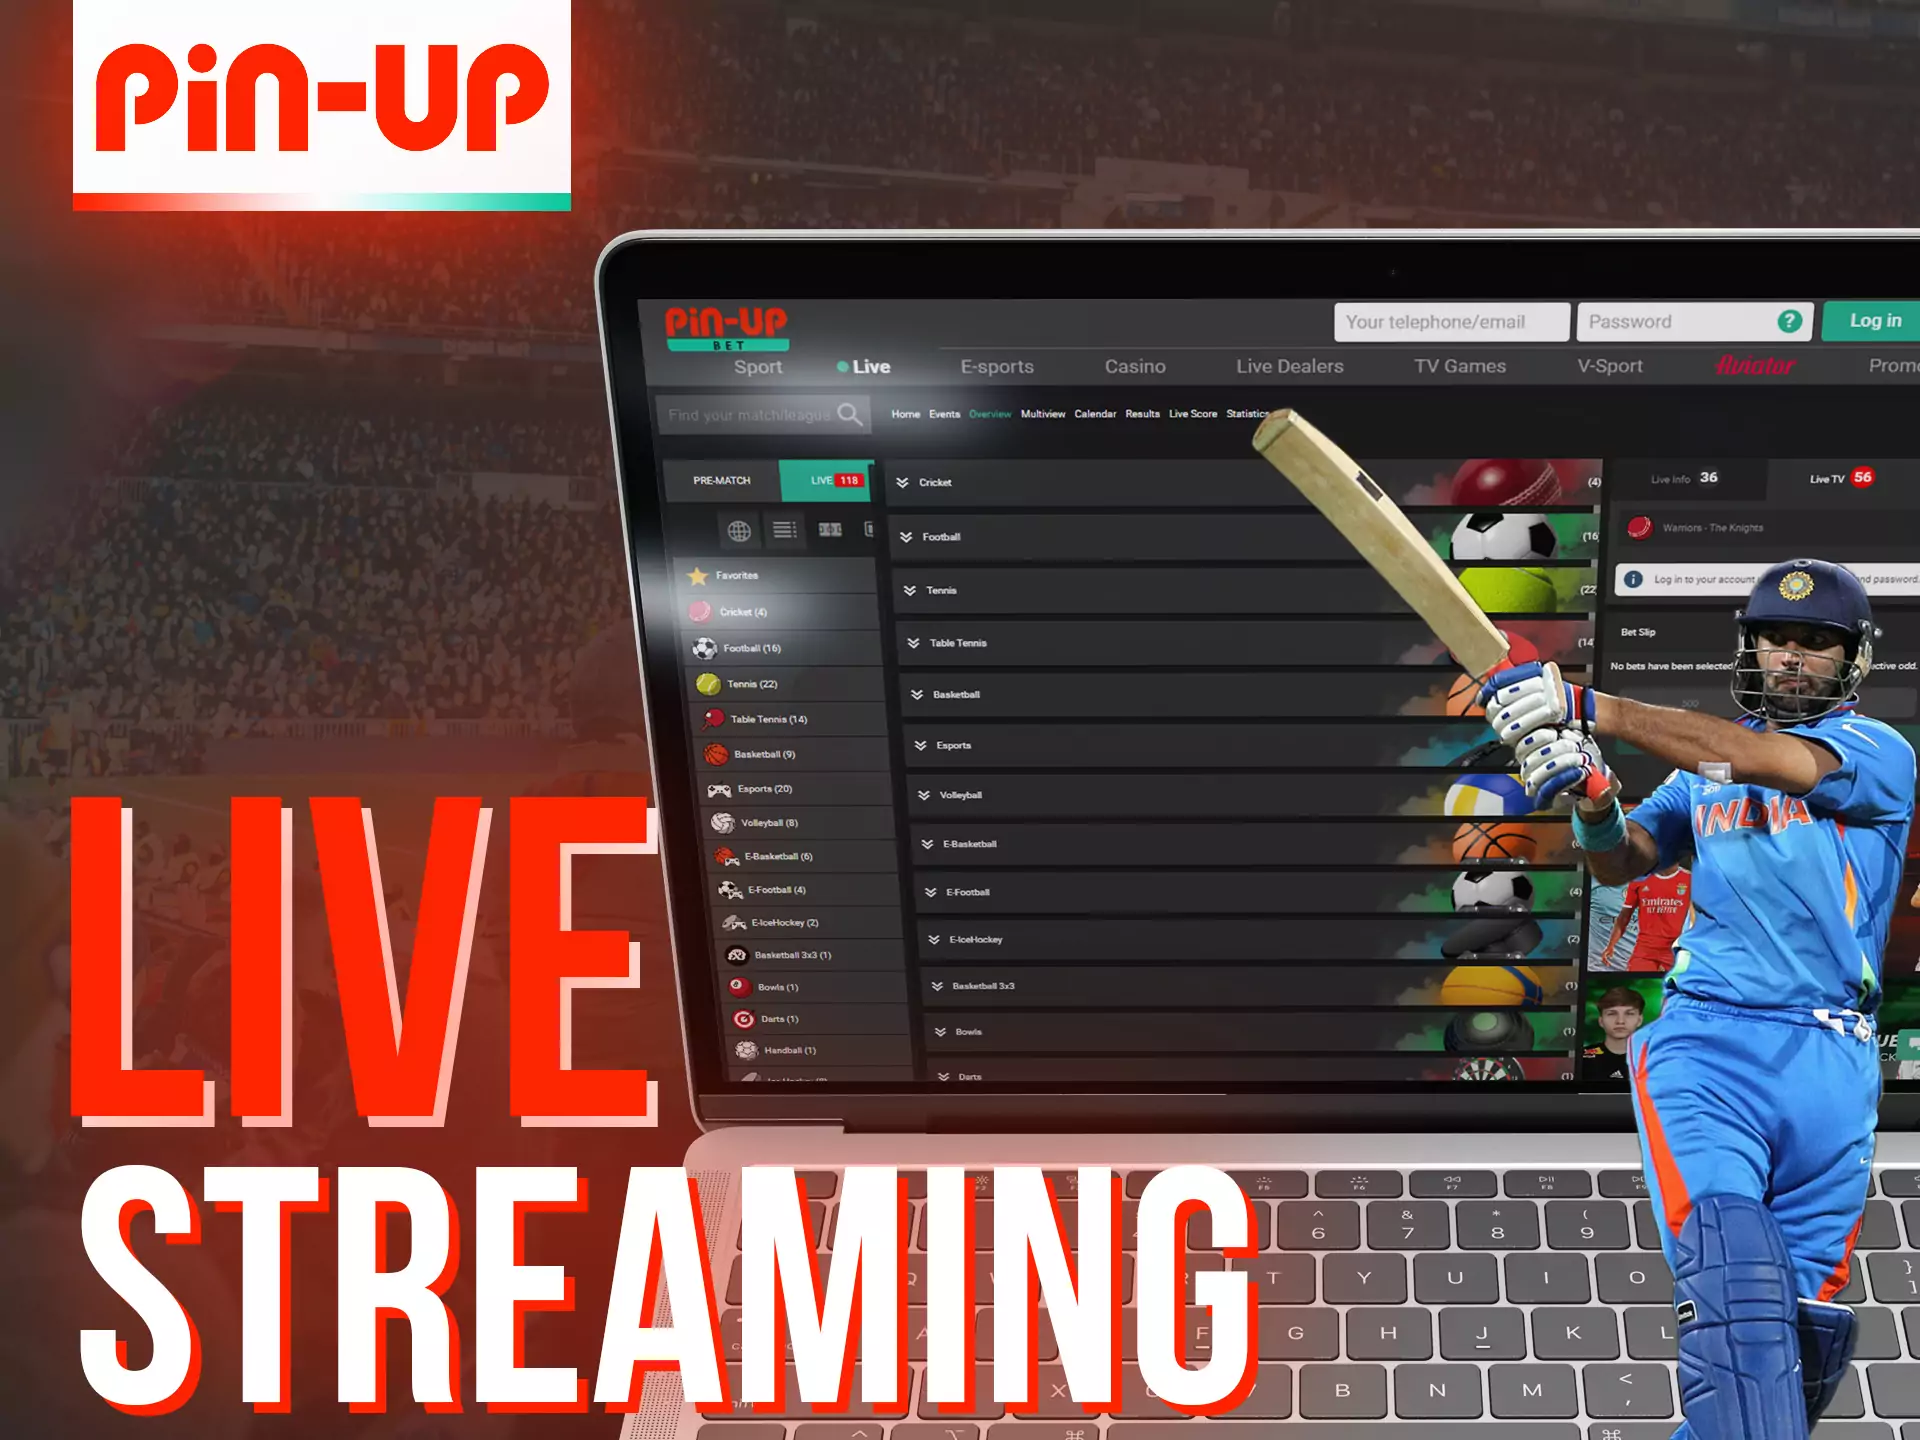 At Pin-up make bets on matches that are streamed live.